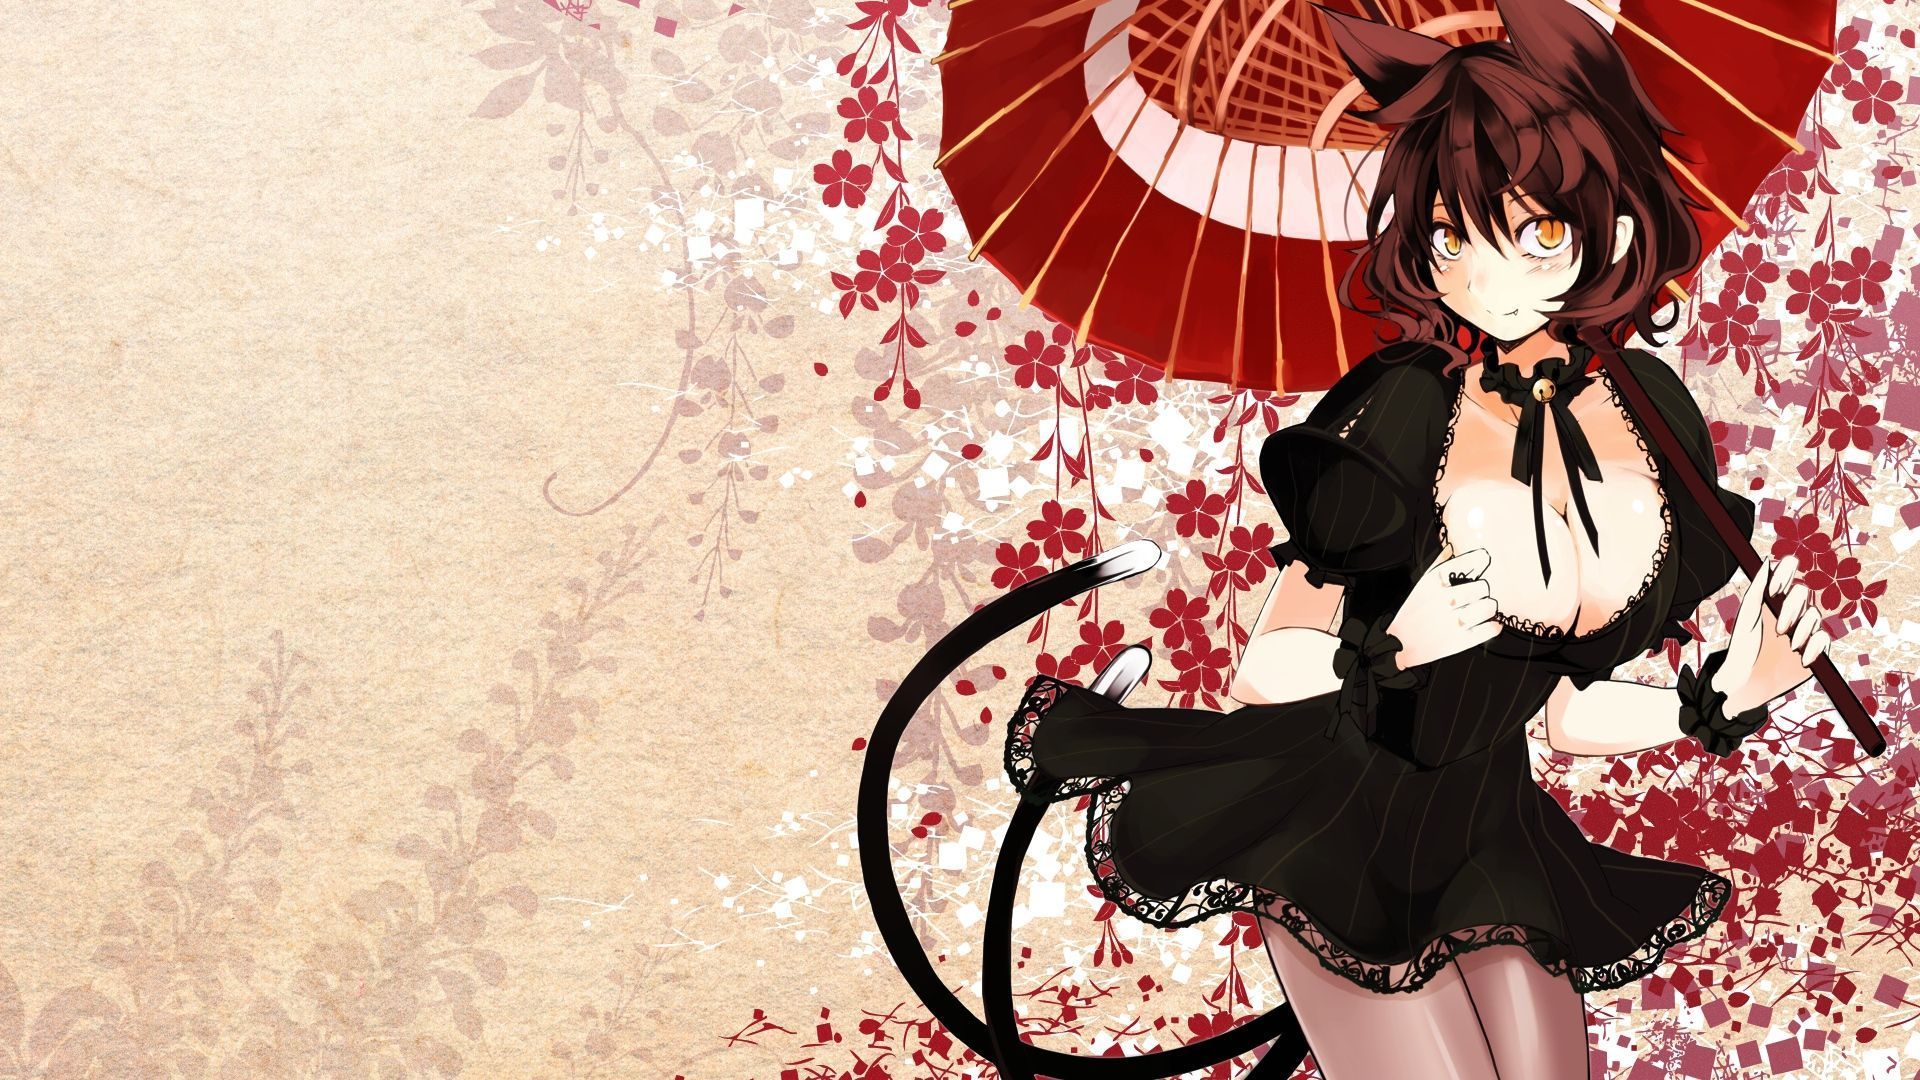 10 Best Wallpapers Hd Anime 1920X1080 FULL HD 1080p For PC Background